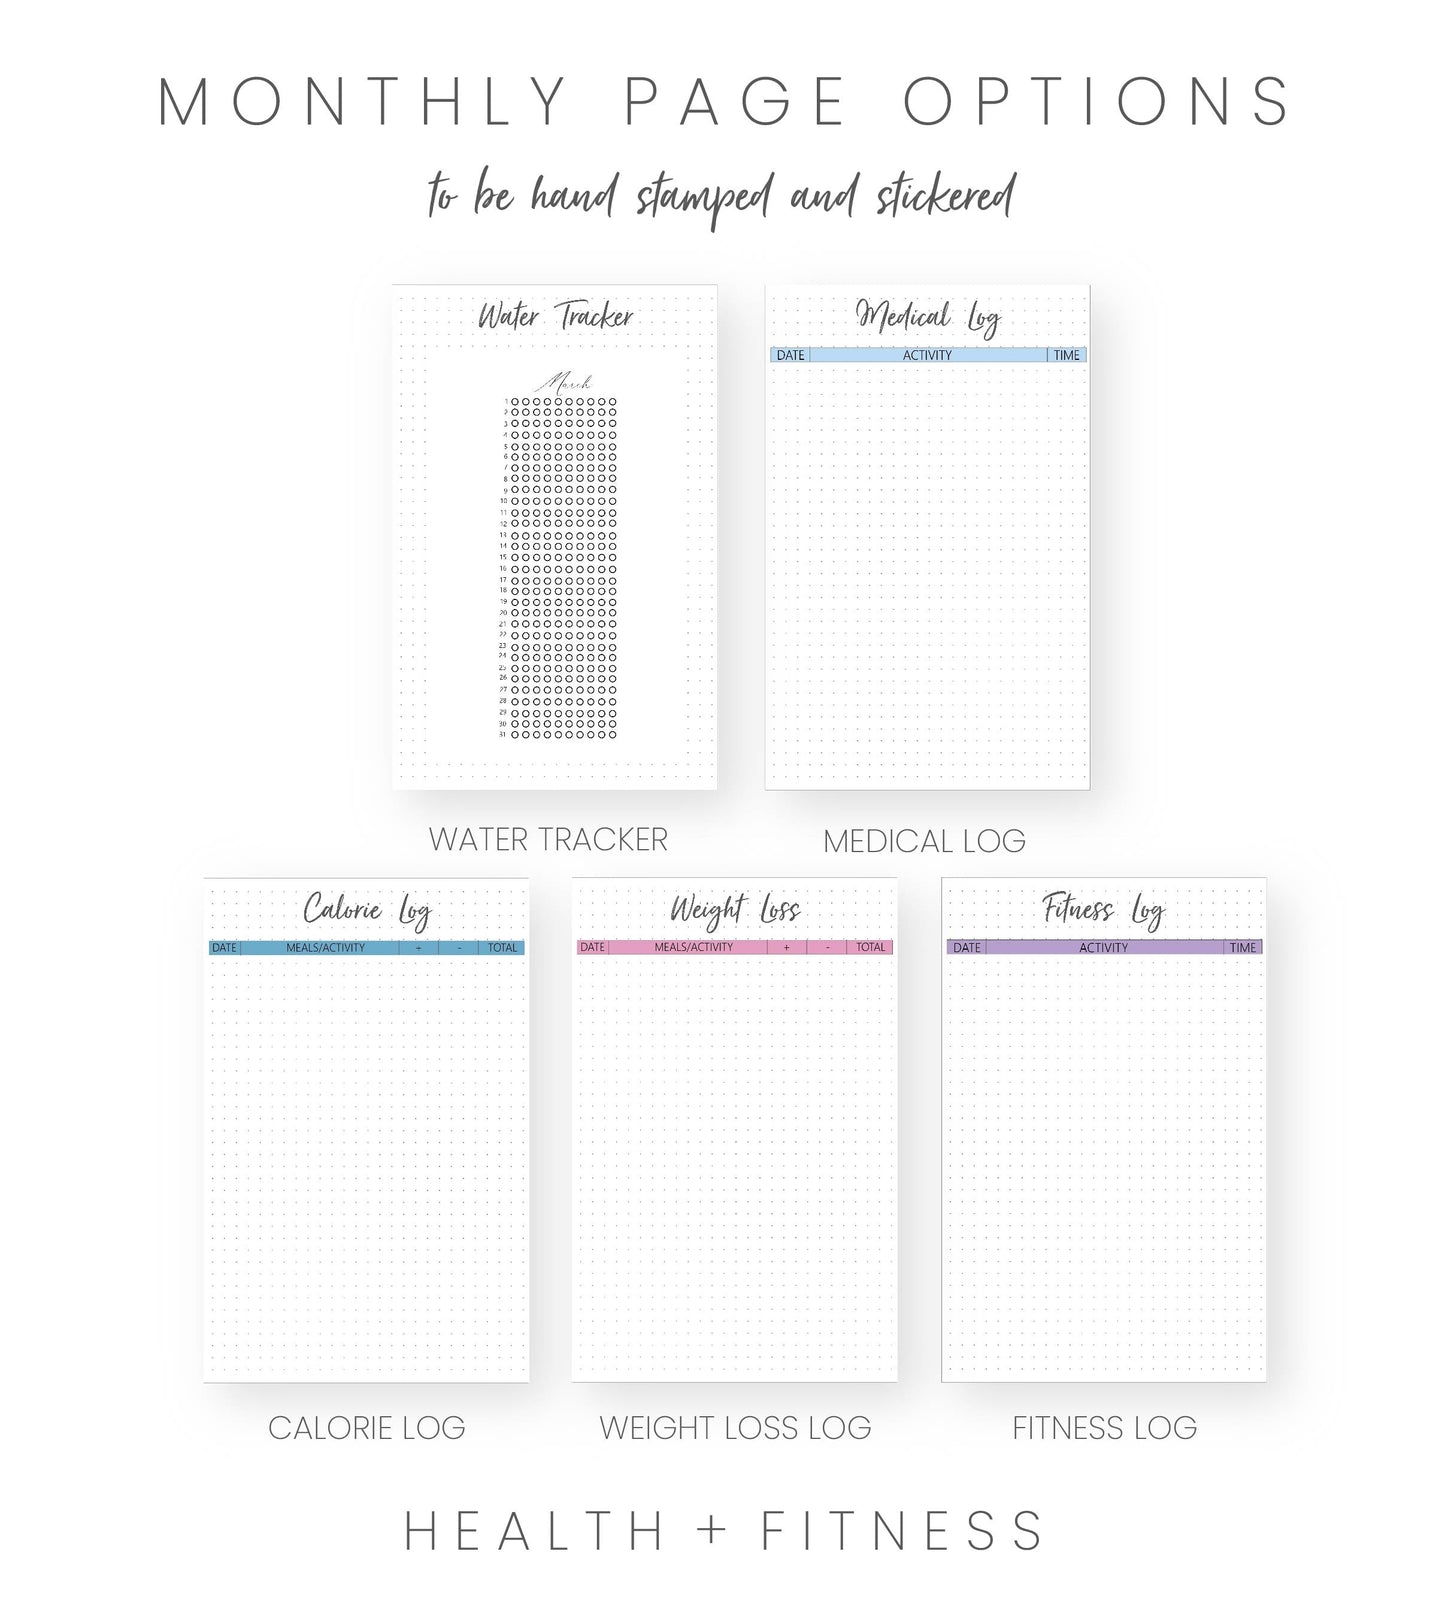 2023-24 Personalized Illustrated Planner Butter